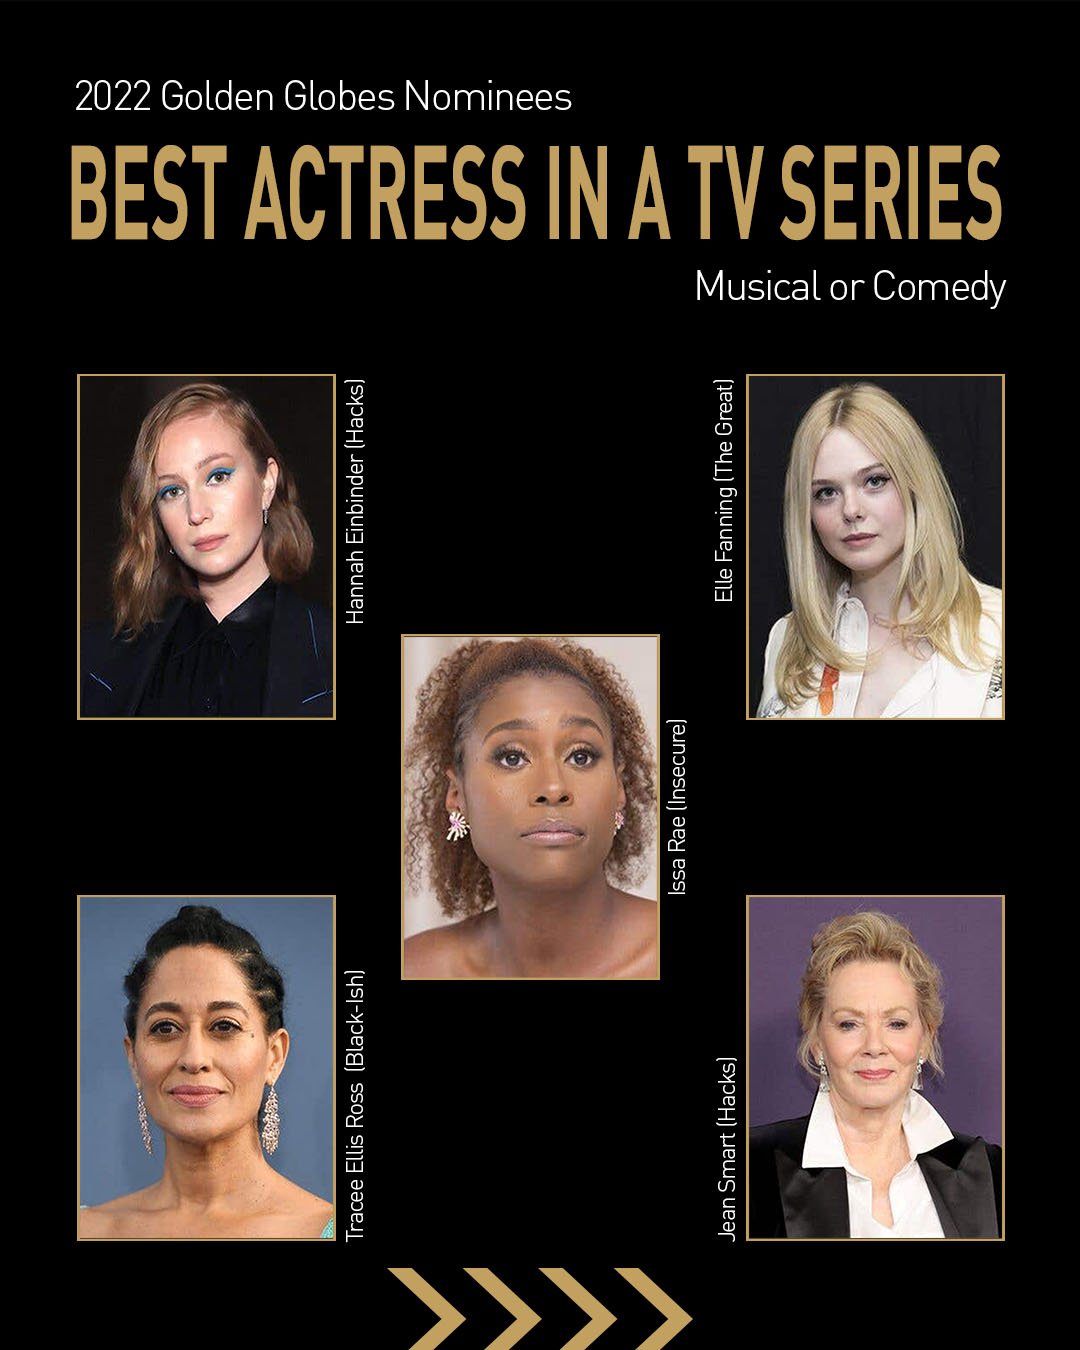 Nominations-IG Posts3C - Best Actress in a TV Series - Musical or Comedy.jpg